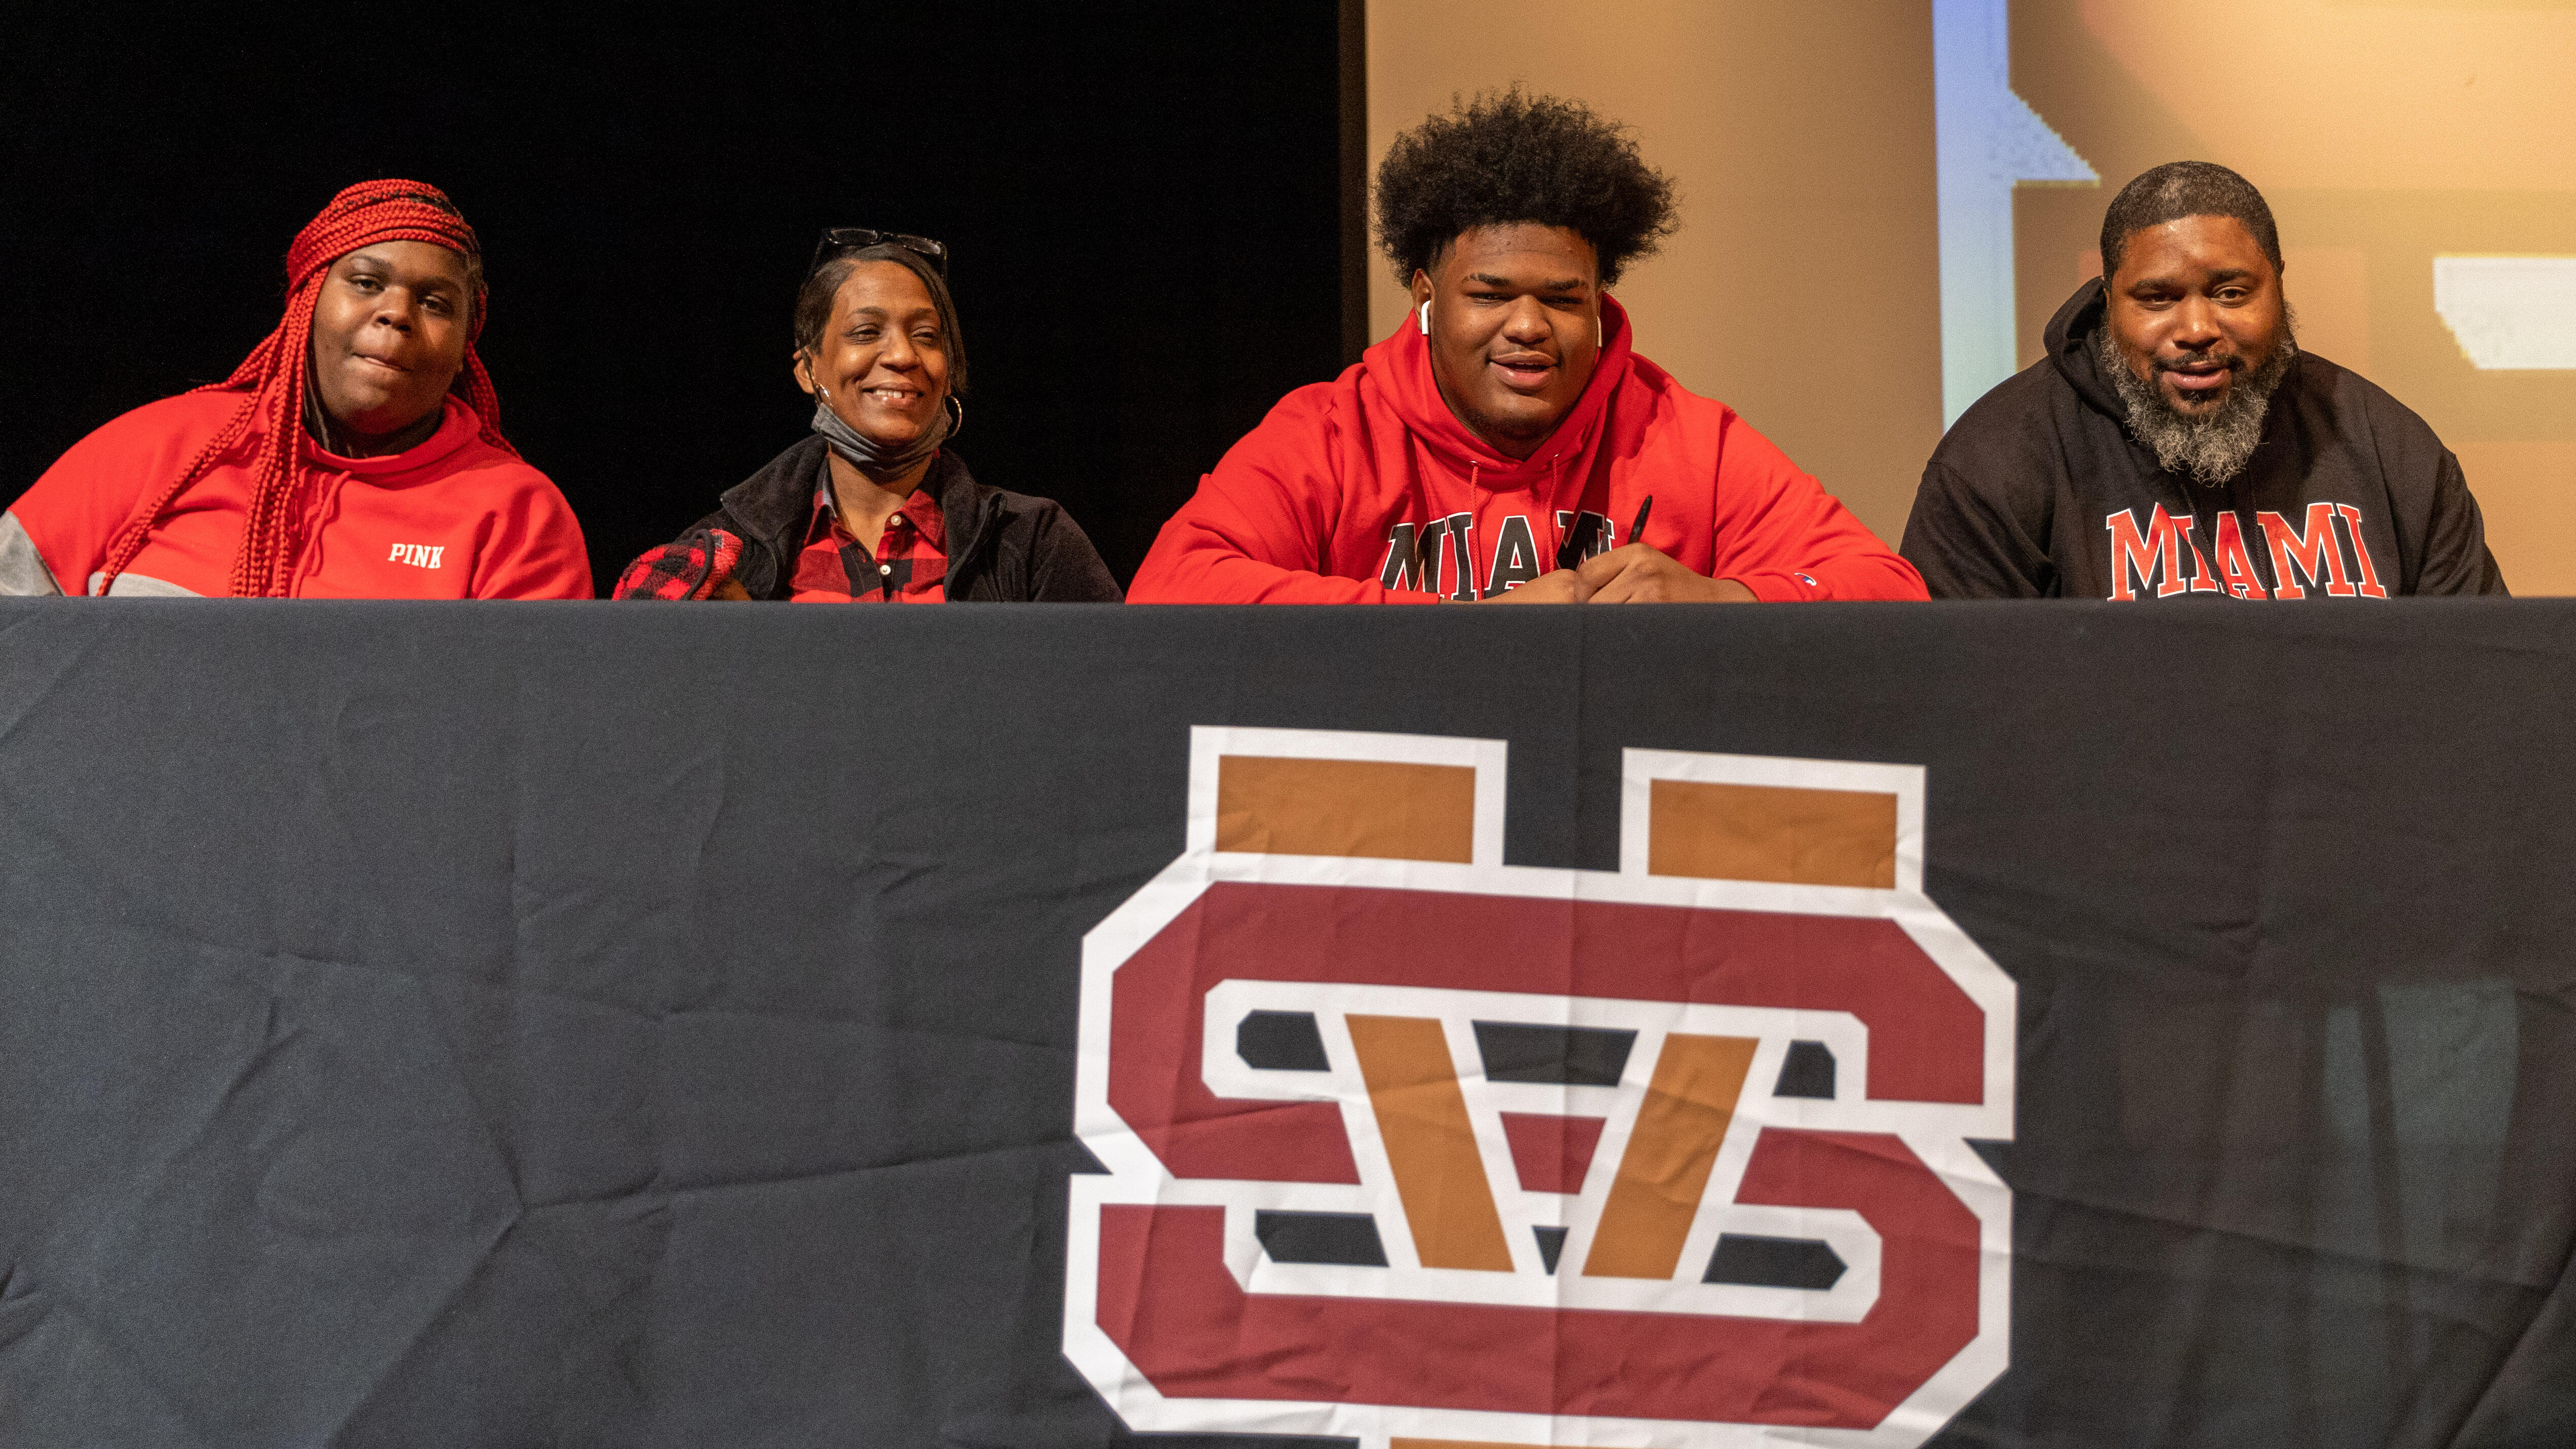 Greg Smith signs his National Letter of Intent while surrounded by his family. He is seated at a table on a stage.